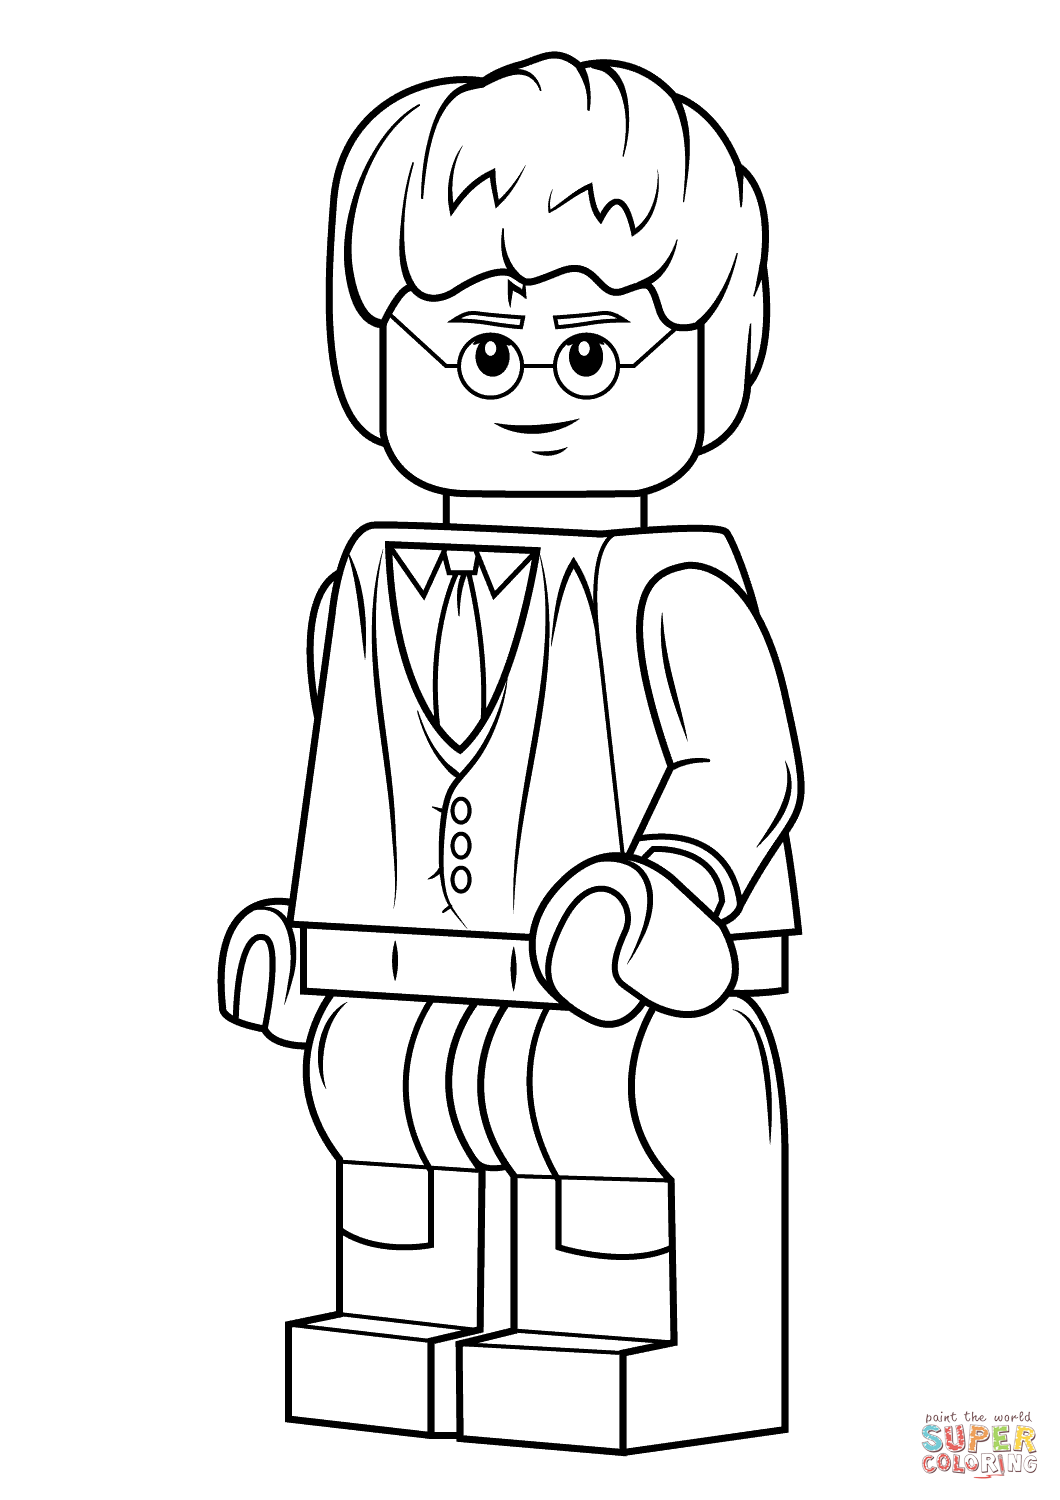 Lego Harry Potter - Coloring Pages for Kids and for Adults